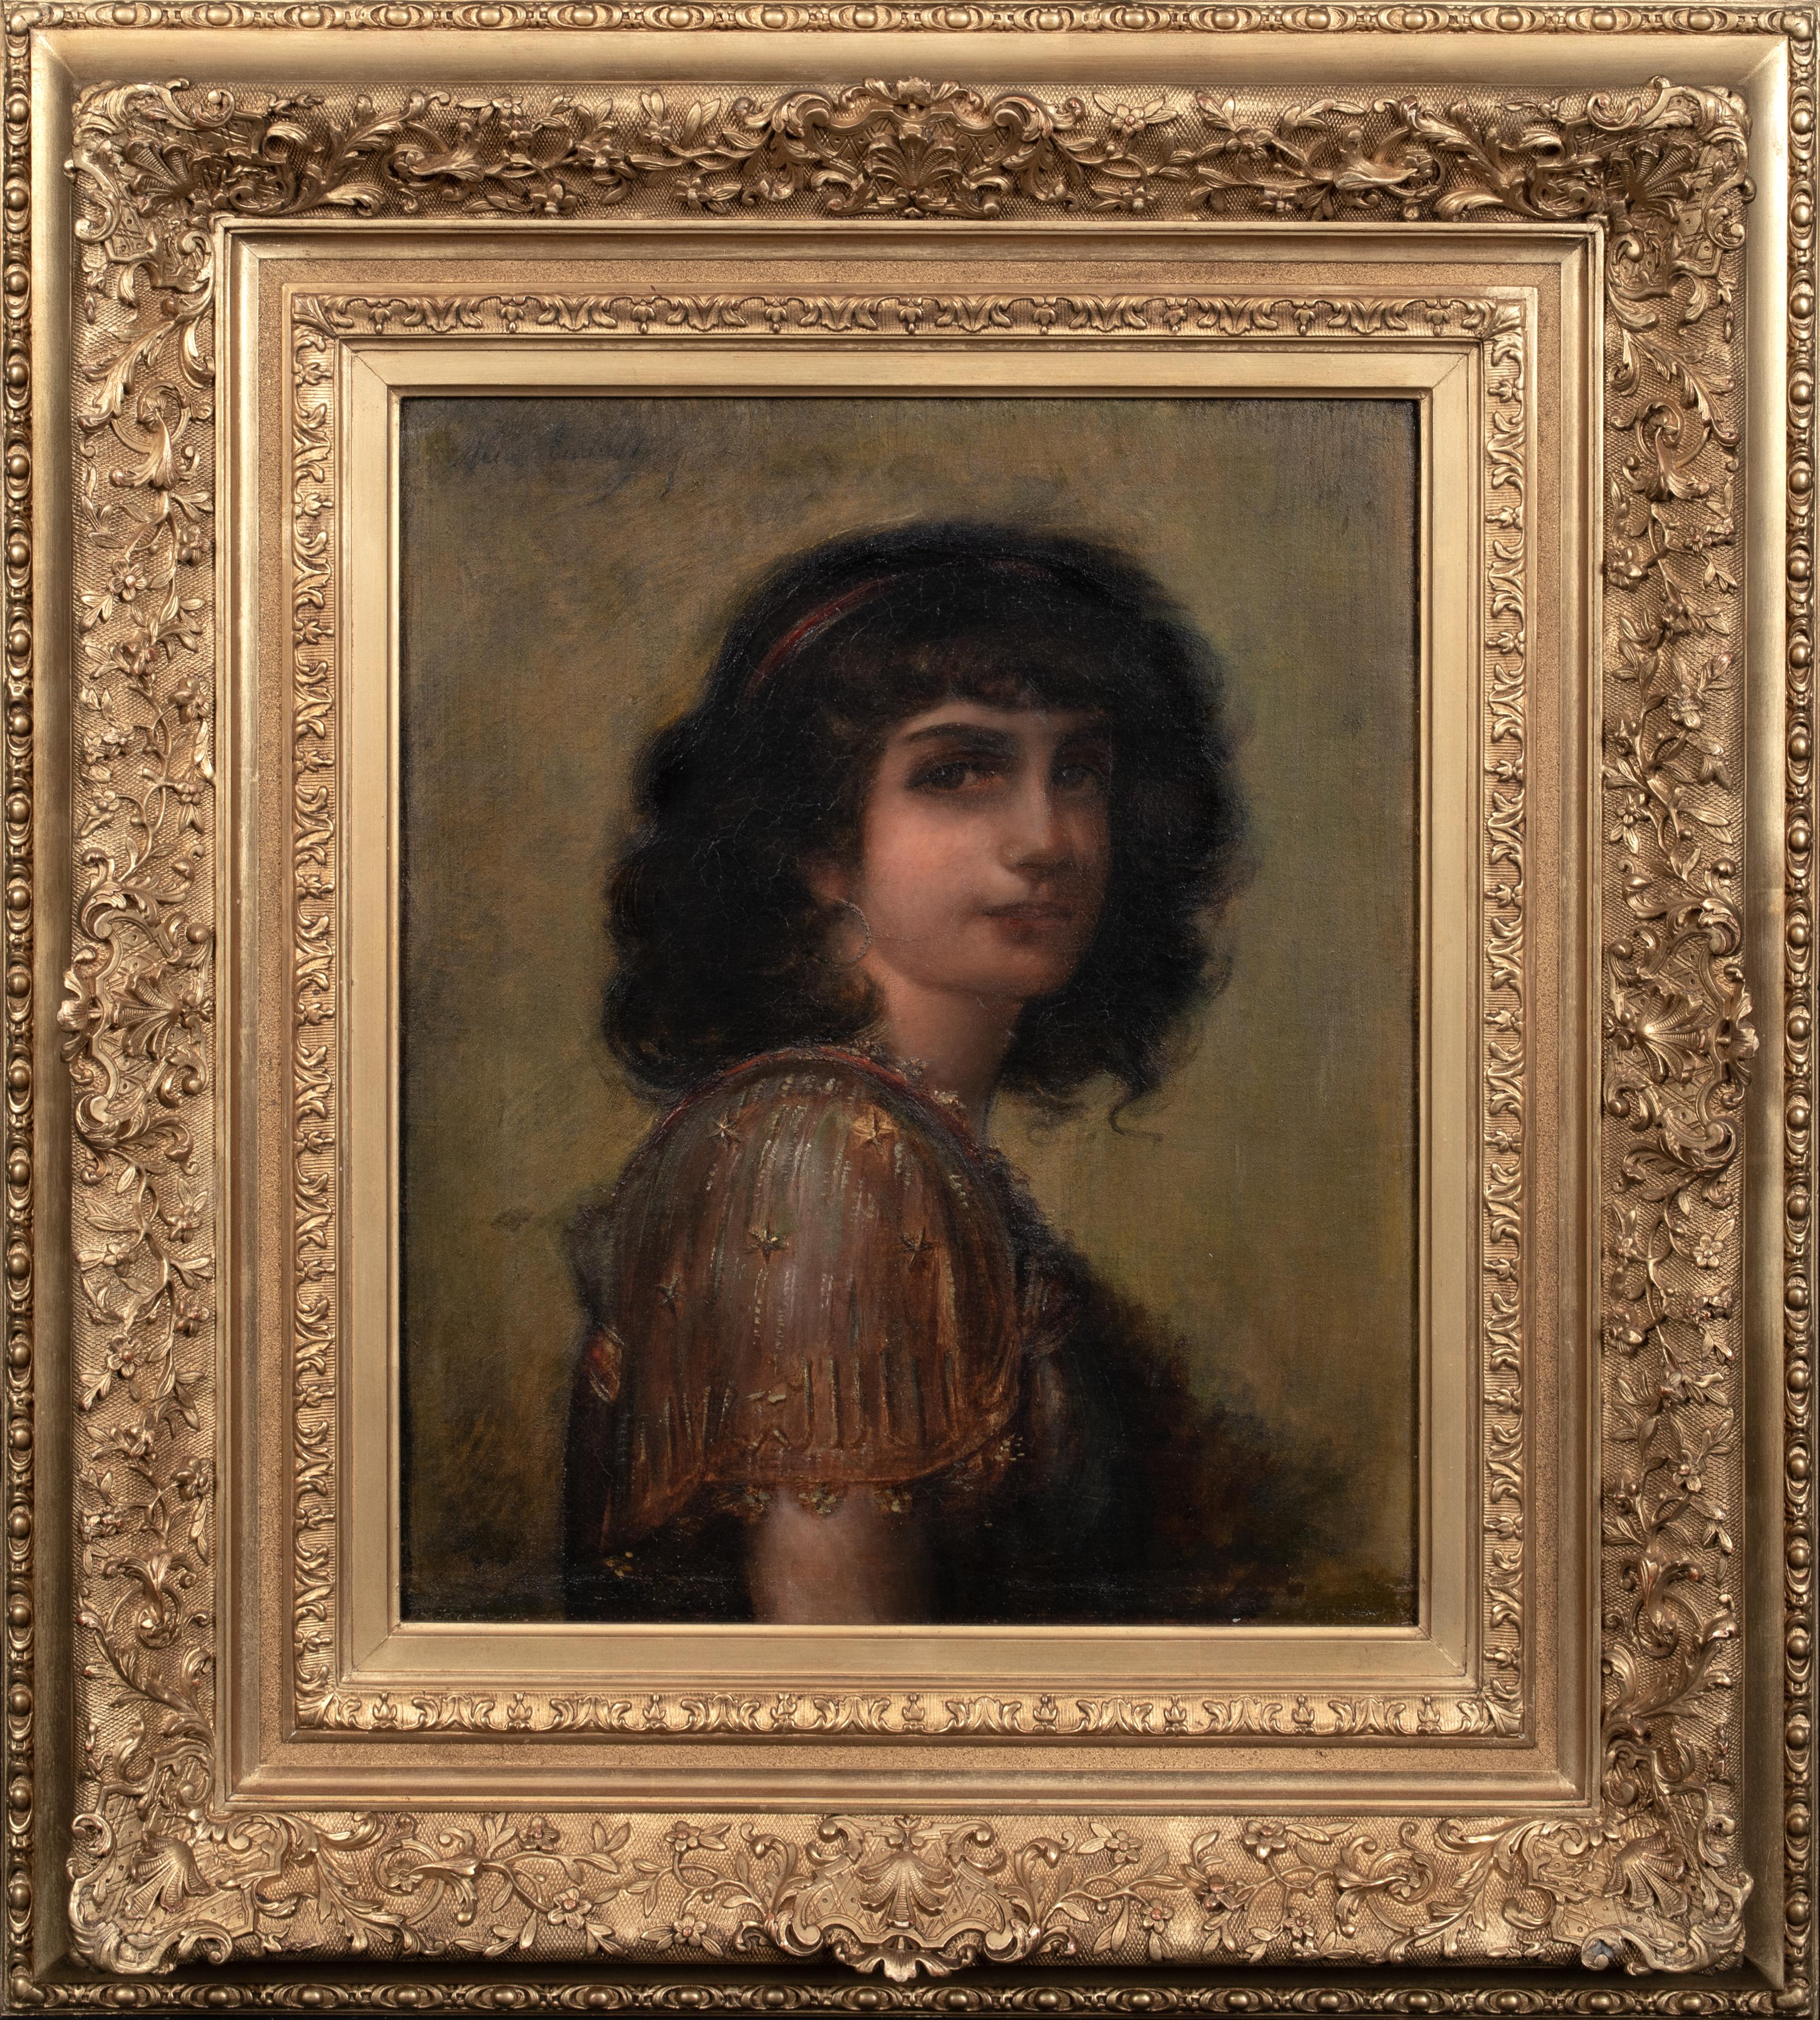 Unknown Portrait Painting - Portrait Of A Gipsy Girl, 19th Century  by Alix Louise ENAULT (1860-1913) 